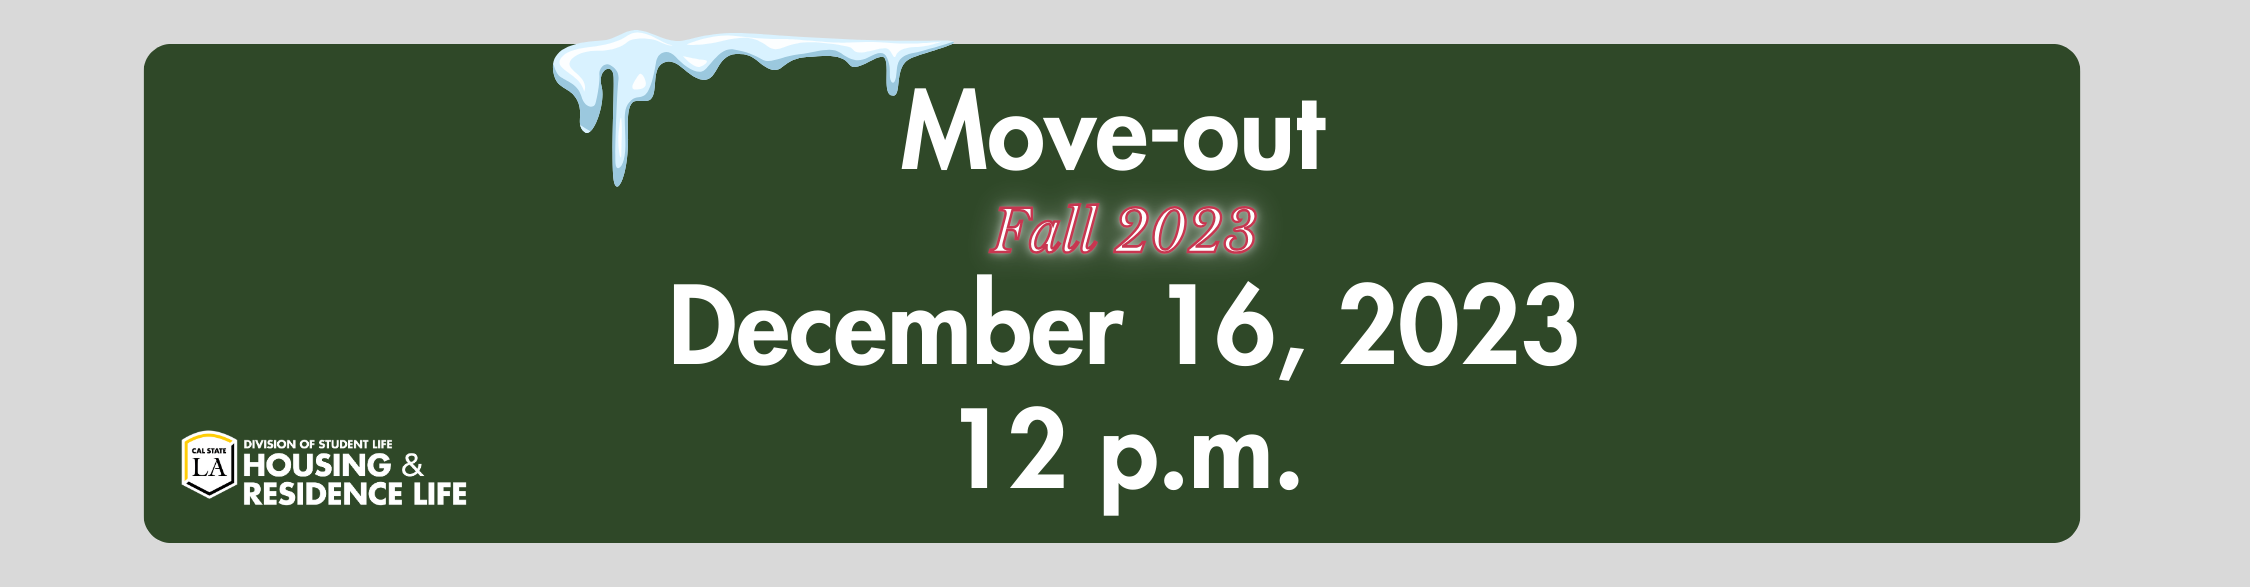 Move-out Fall 2023. December 16, 2023 12 p.m. Cal State LA Division of Student Life Housing and Residence Life.